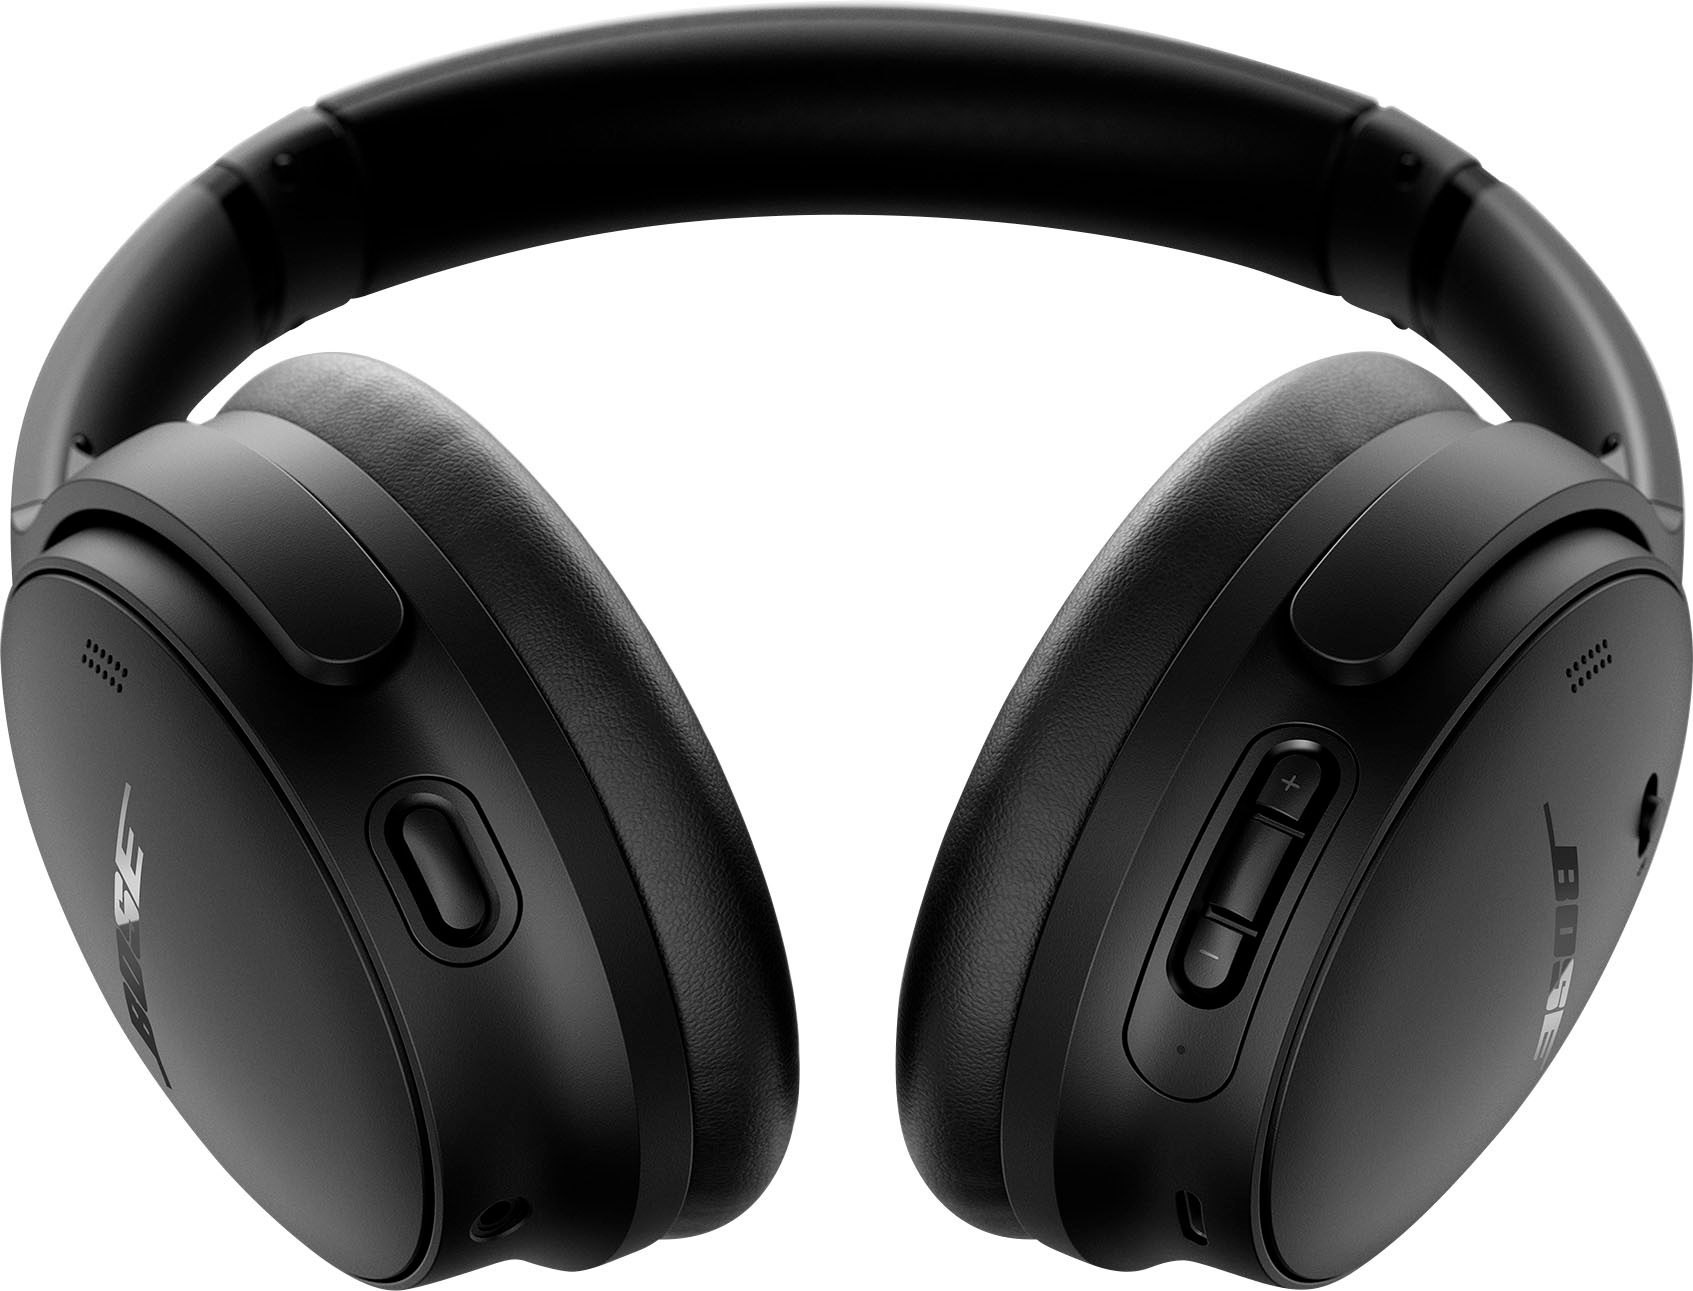 Angle View: Bose - QuietComfort Wireless Noise Cancelling Over-the-Ear Headphones - Black